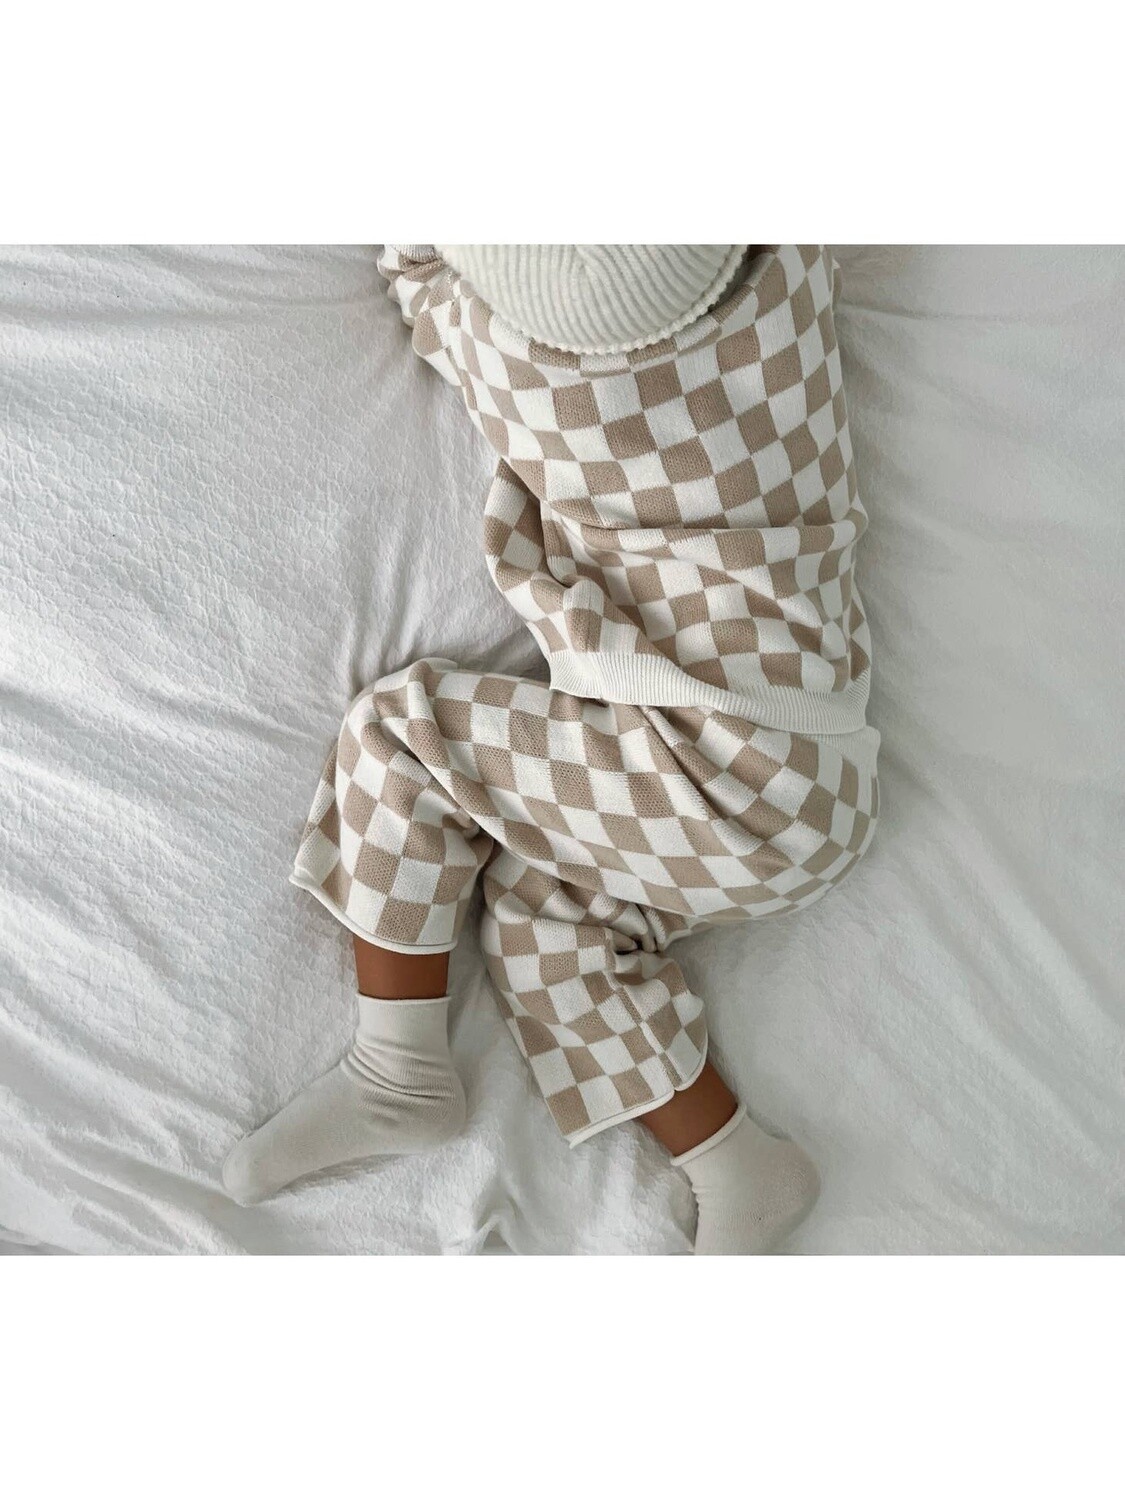 Checkered Jacquard Pants, Color: Beige/Cream, Size: 2-3 yrs